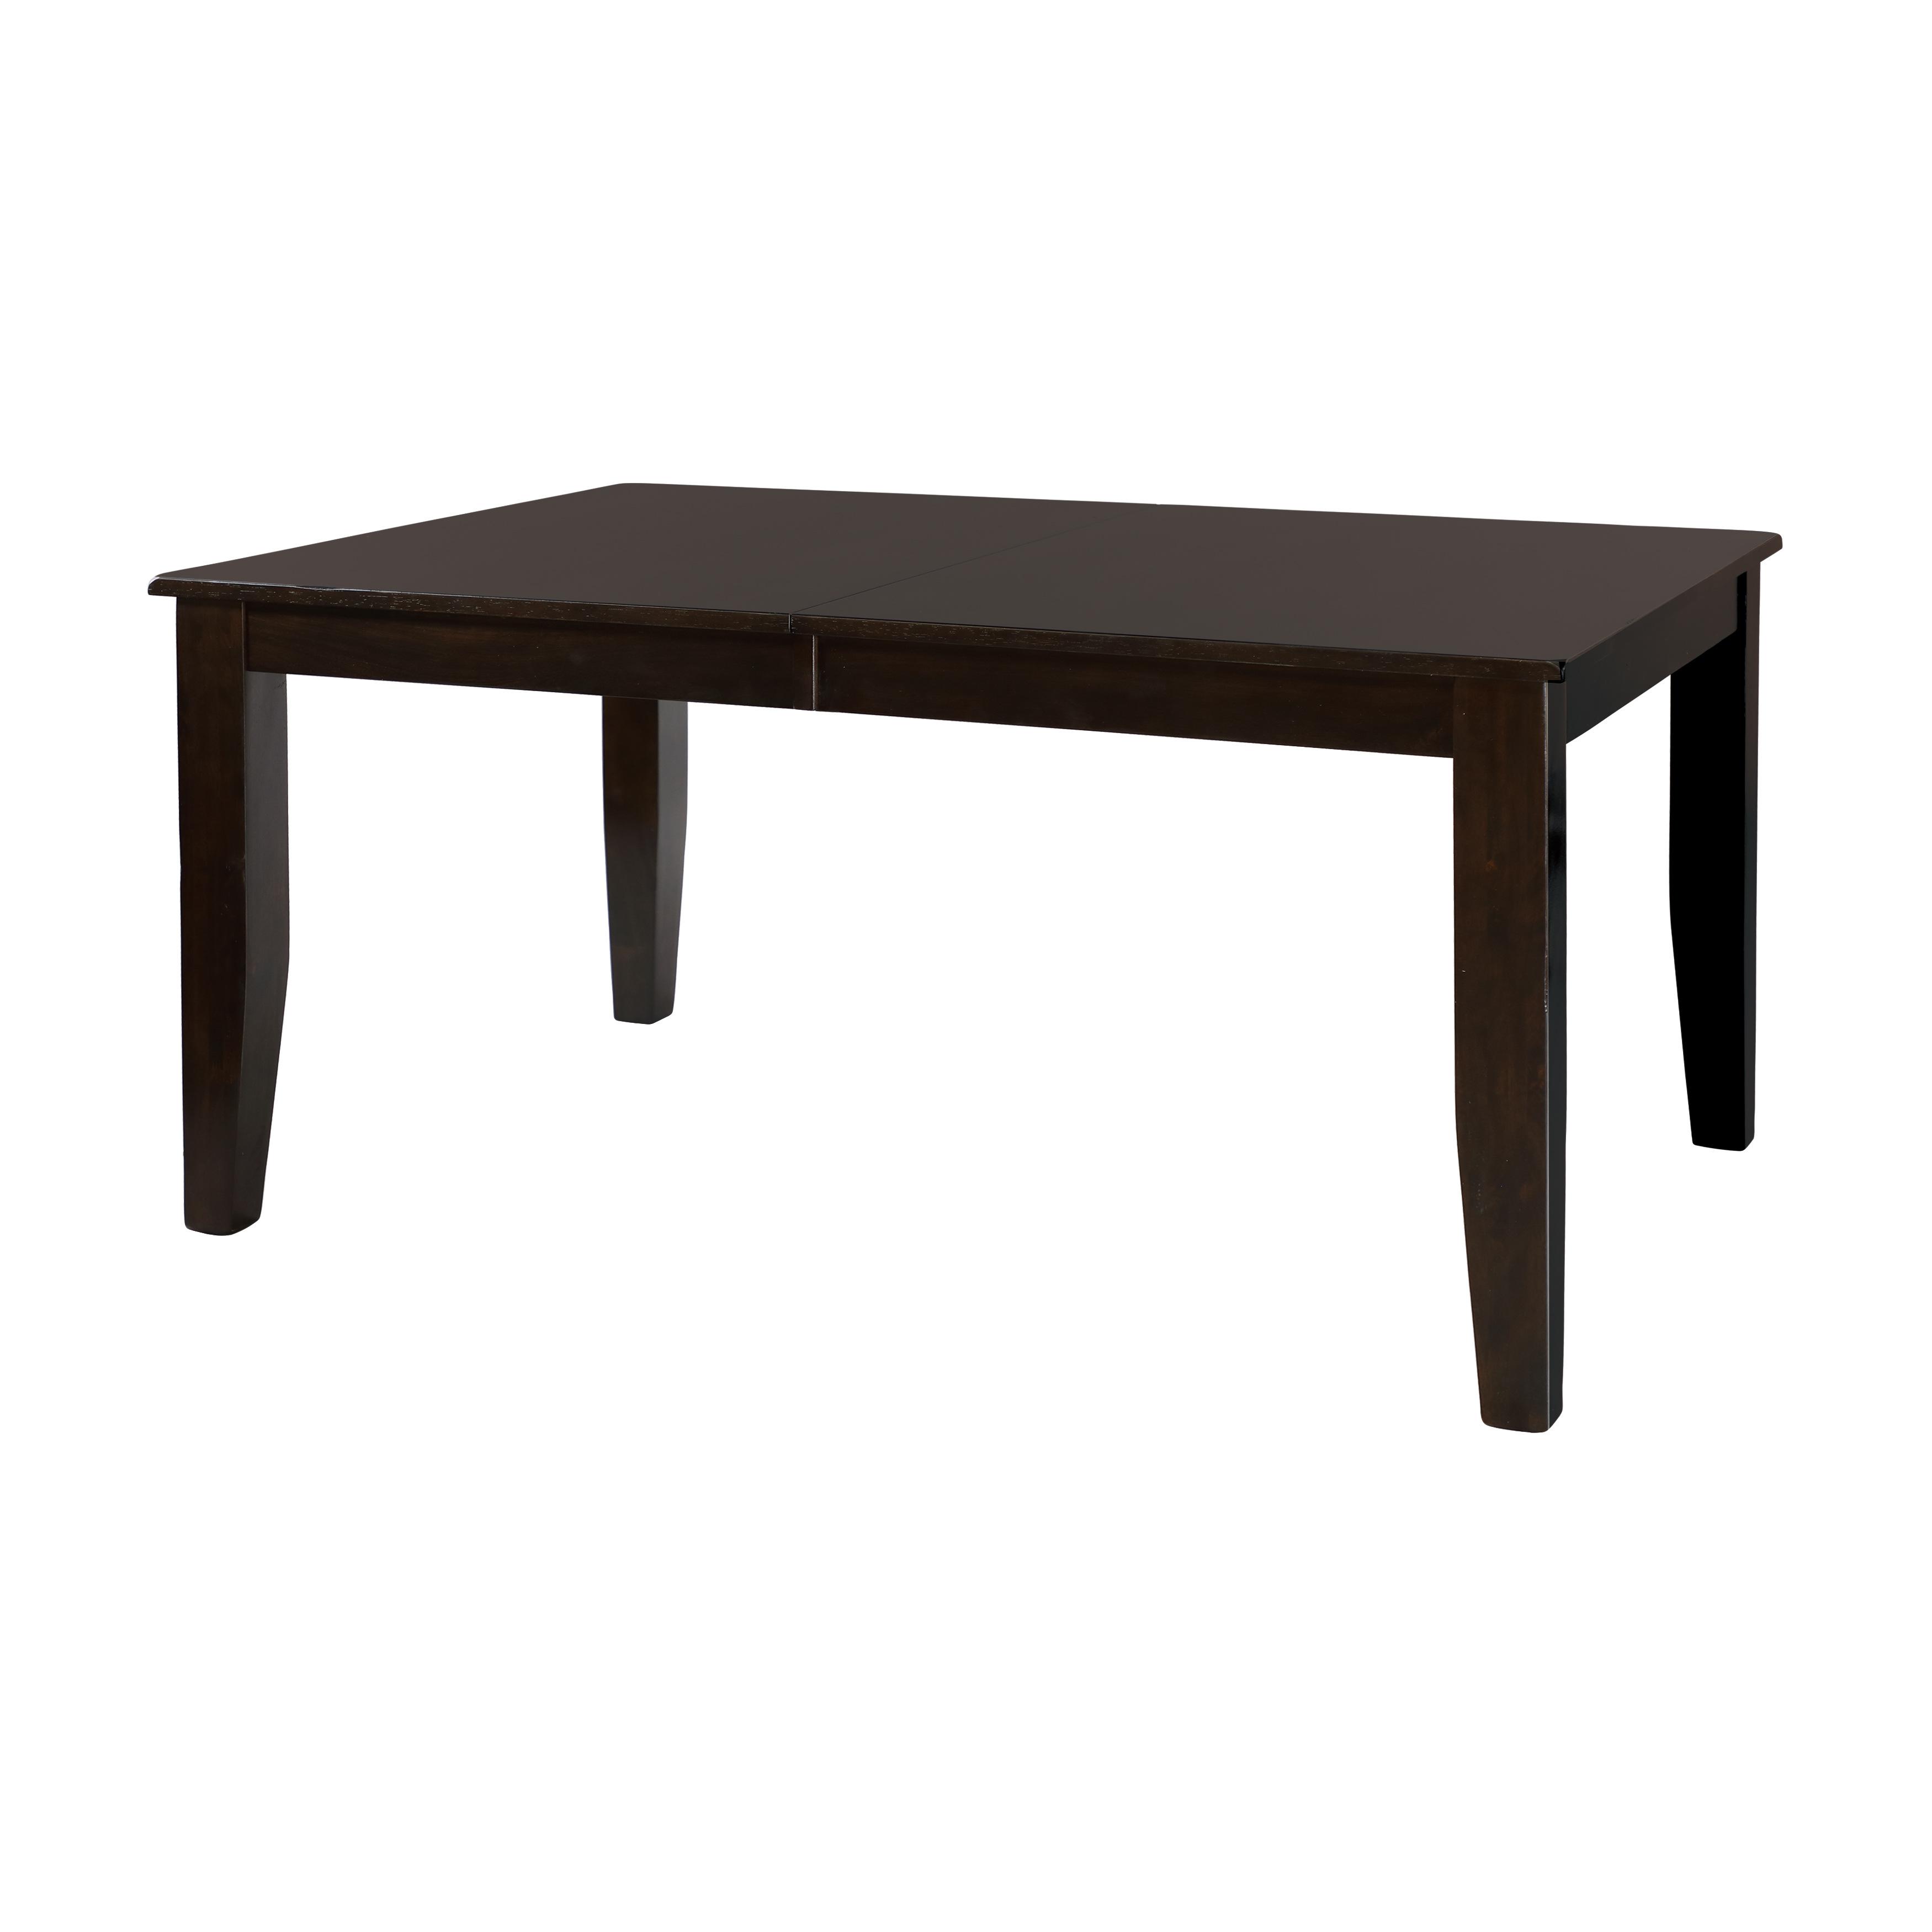 Casual Dining Table 1372-78 Crown Point 1372-78 in Merlot 